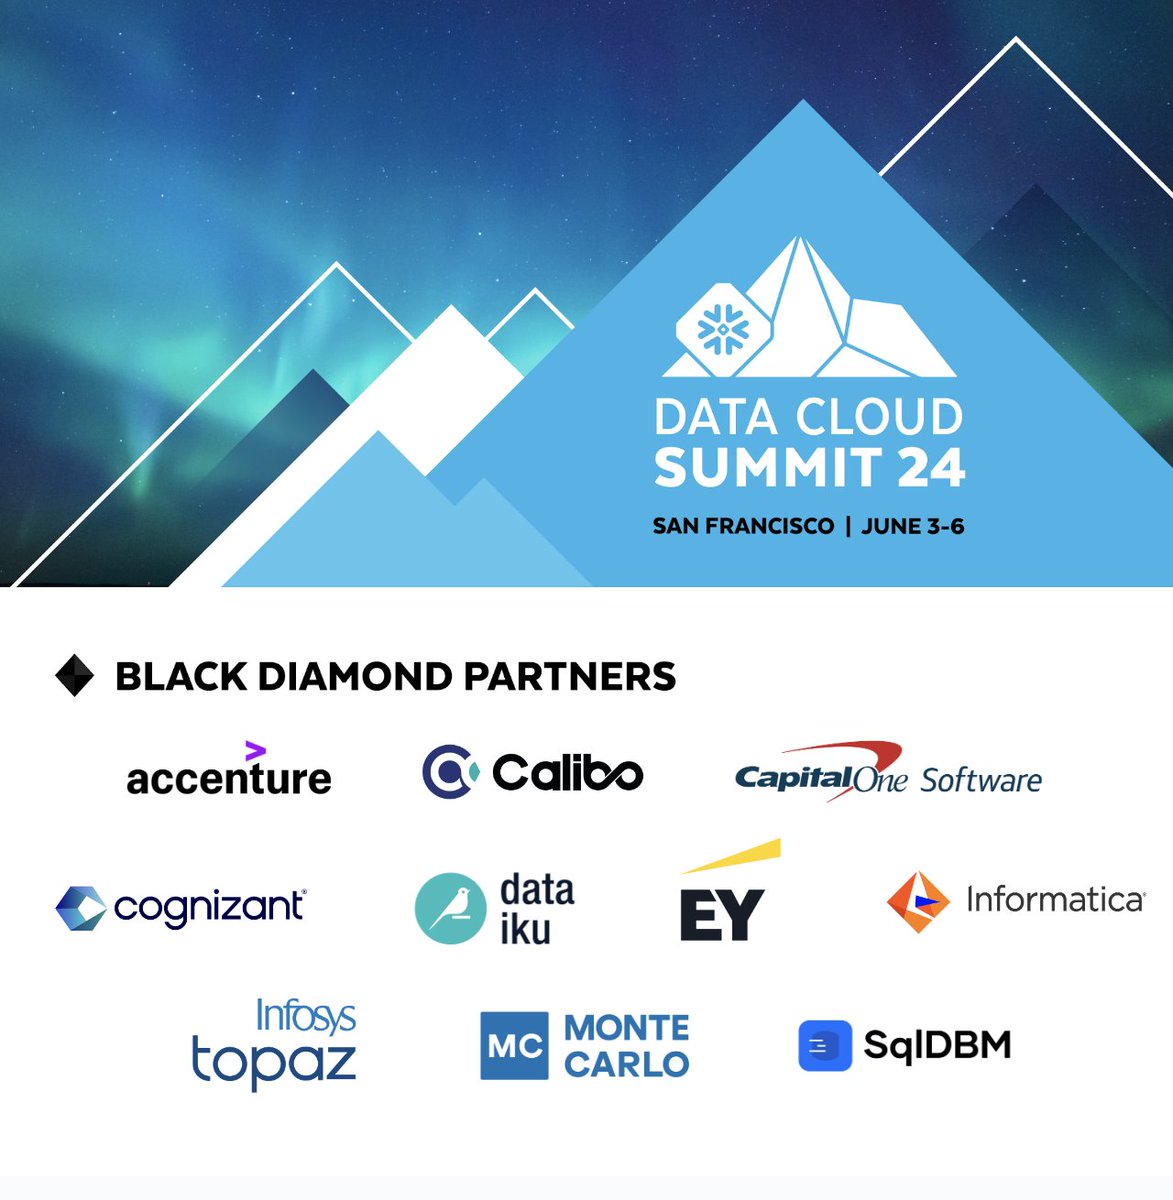 Thrilled to host our Black Diamond partners at #DataCloudSummit: @Accenture @CaliboLLC Capital One @Cognizant @Dataiku EY Ecosystems @Informatica @Infosys @bm_datadowntime SqlDBM Summit is just around the corner and we can’t wait to see you there!